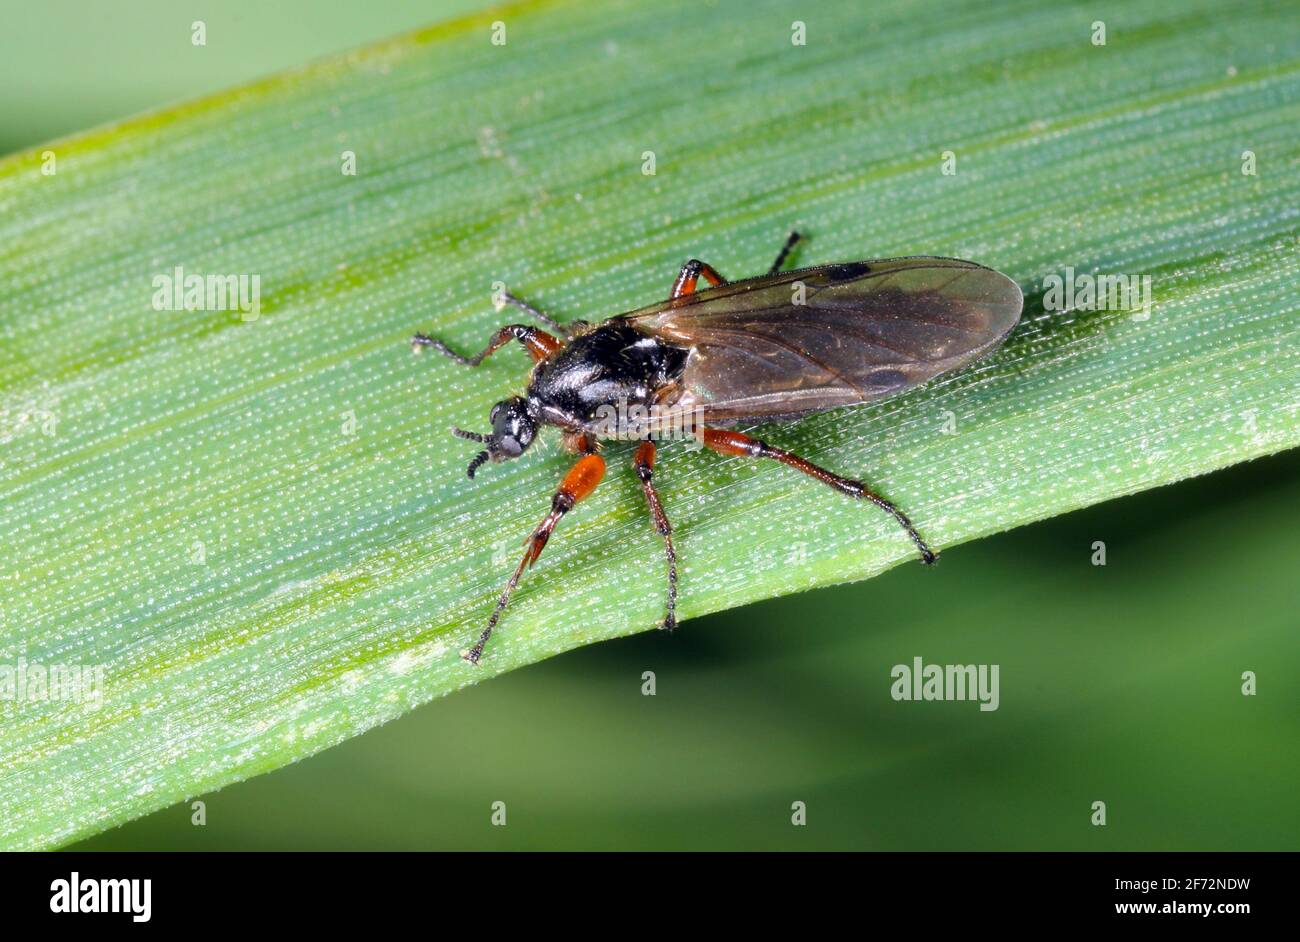 Bibio pomonae is a fly from the family Bibionidae called March flies and lovebugs. Larvae of this insects live in soil and damaged plant roots. Stock Photo